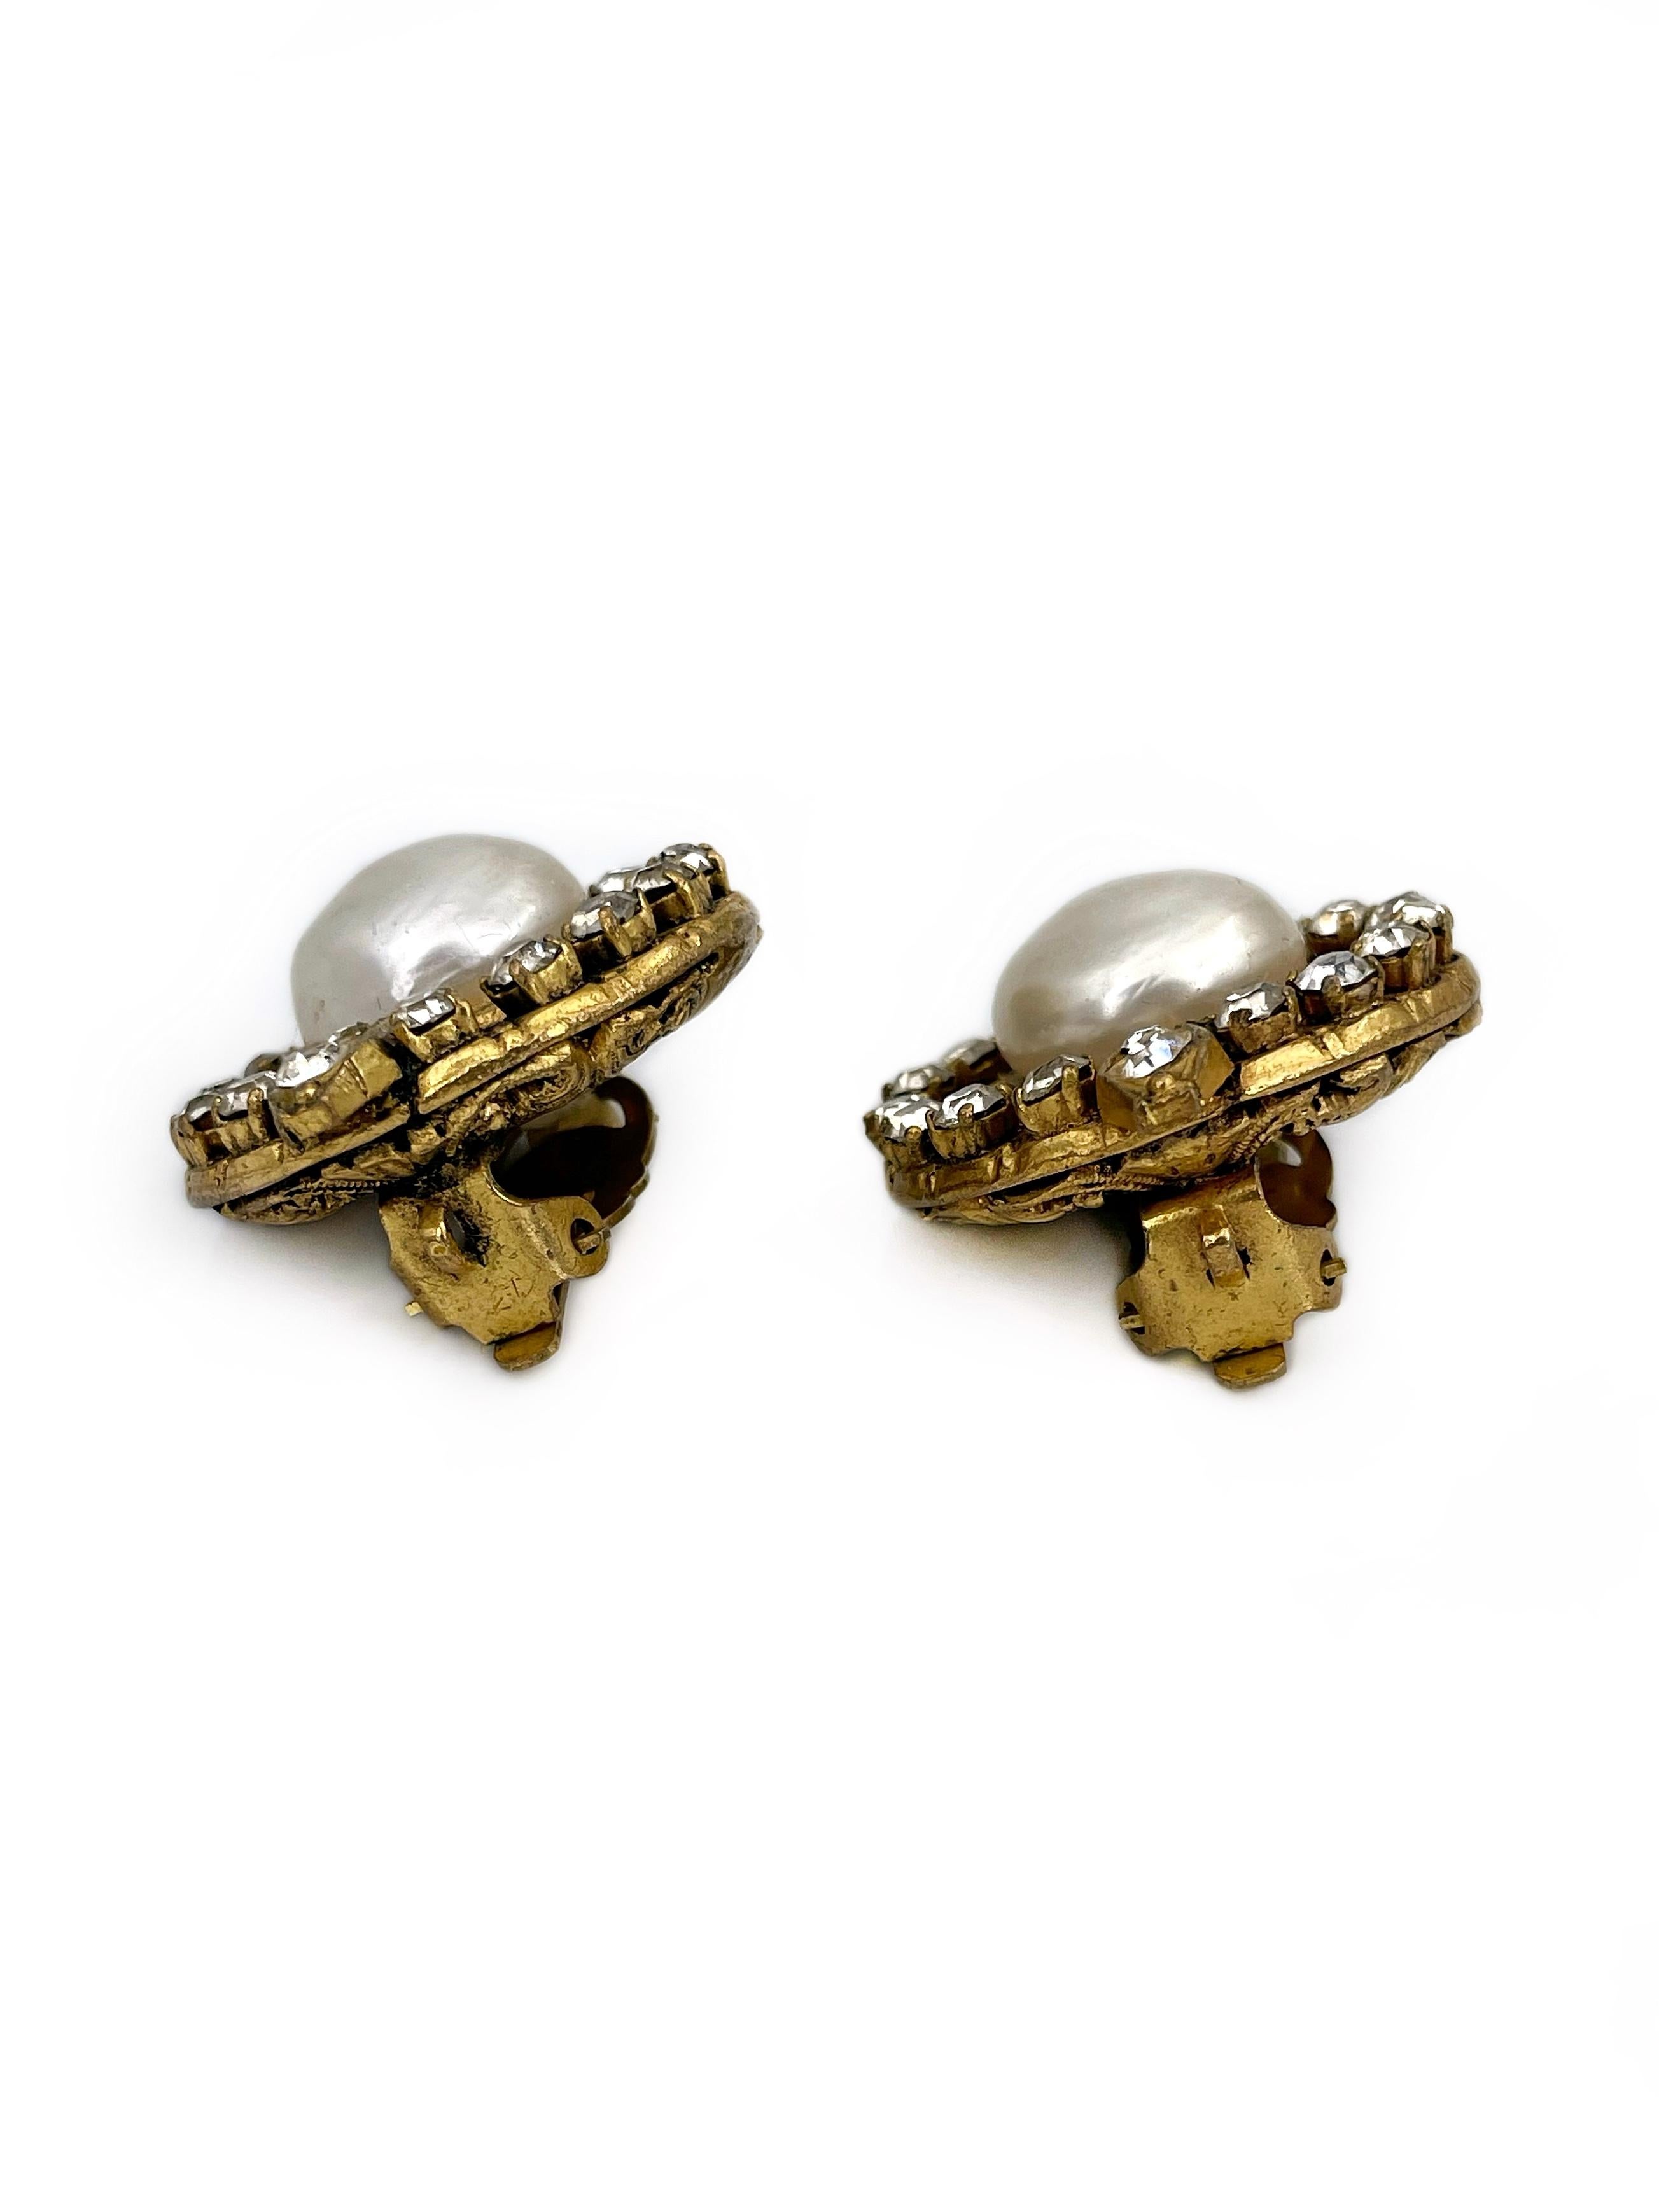 Modern 1970s Vintage Chanel Faux Pearl Crystal Round Clip on Earrings